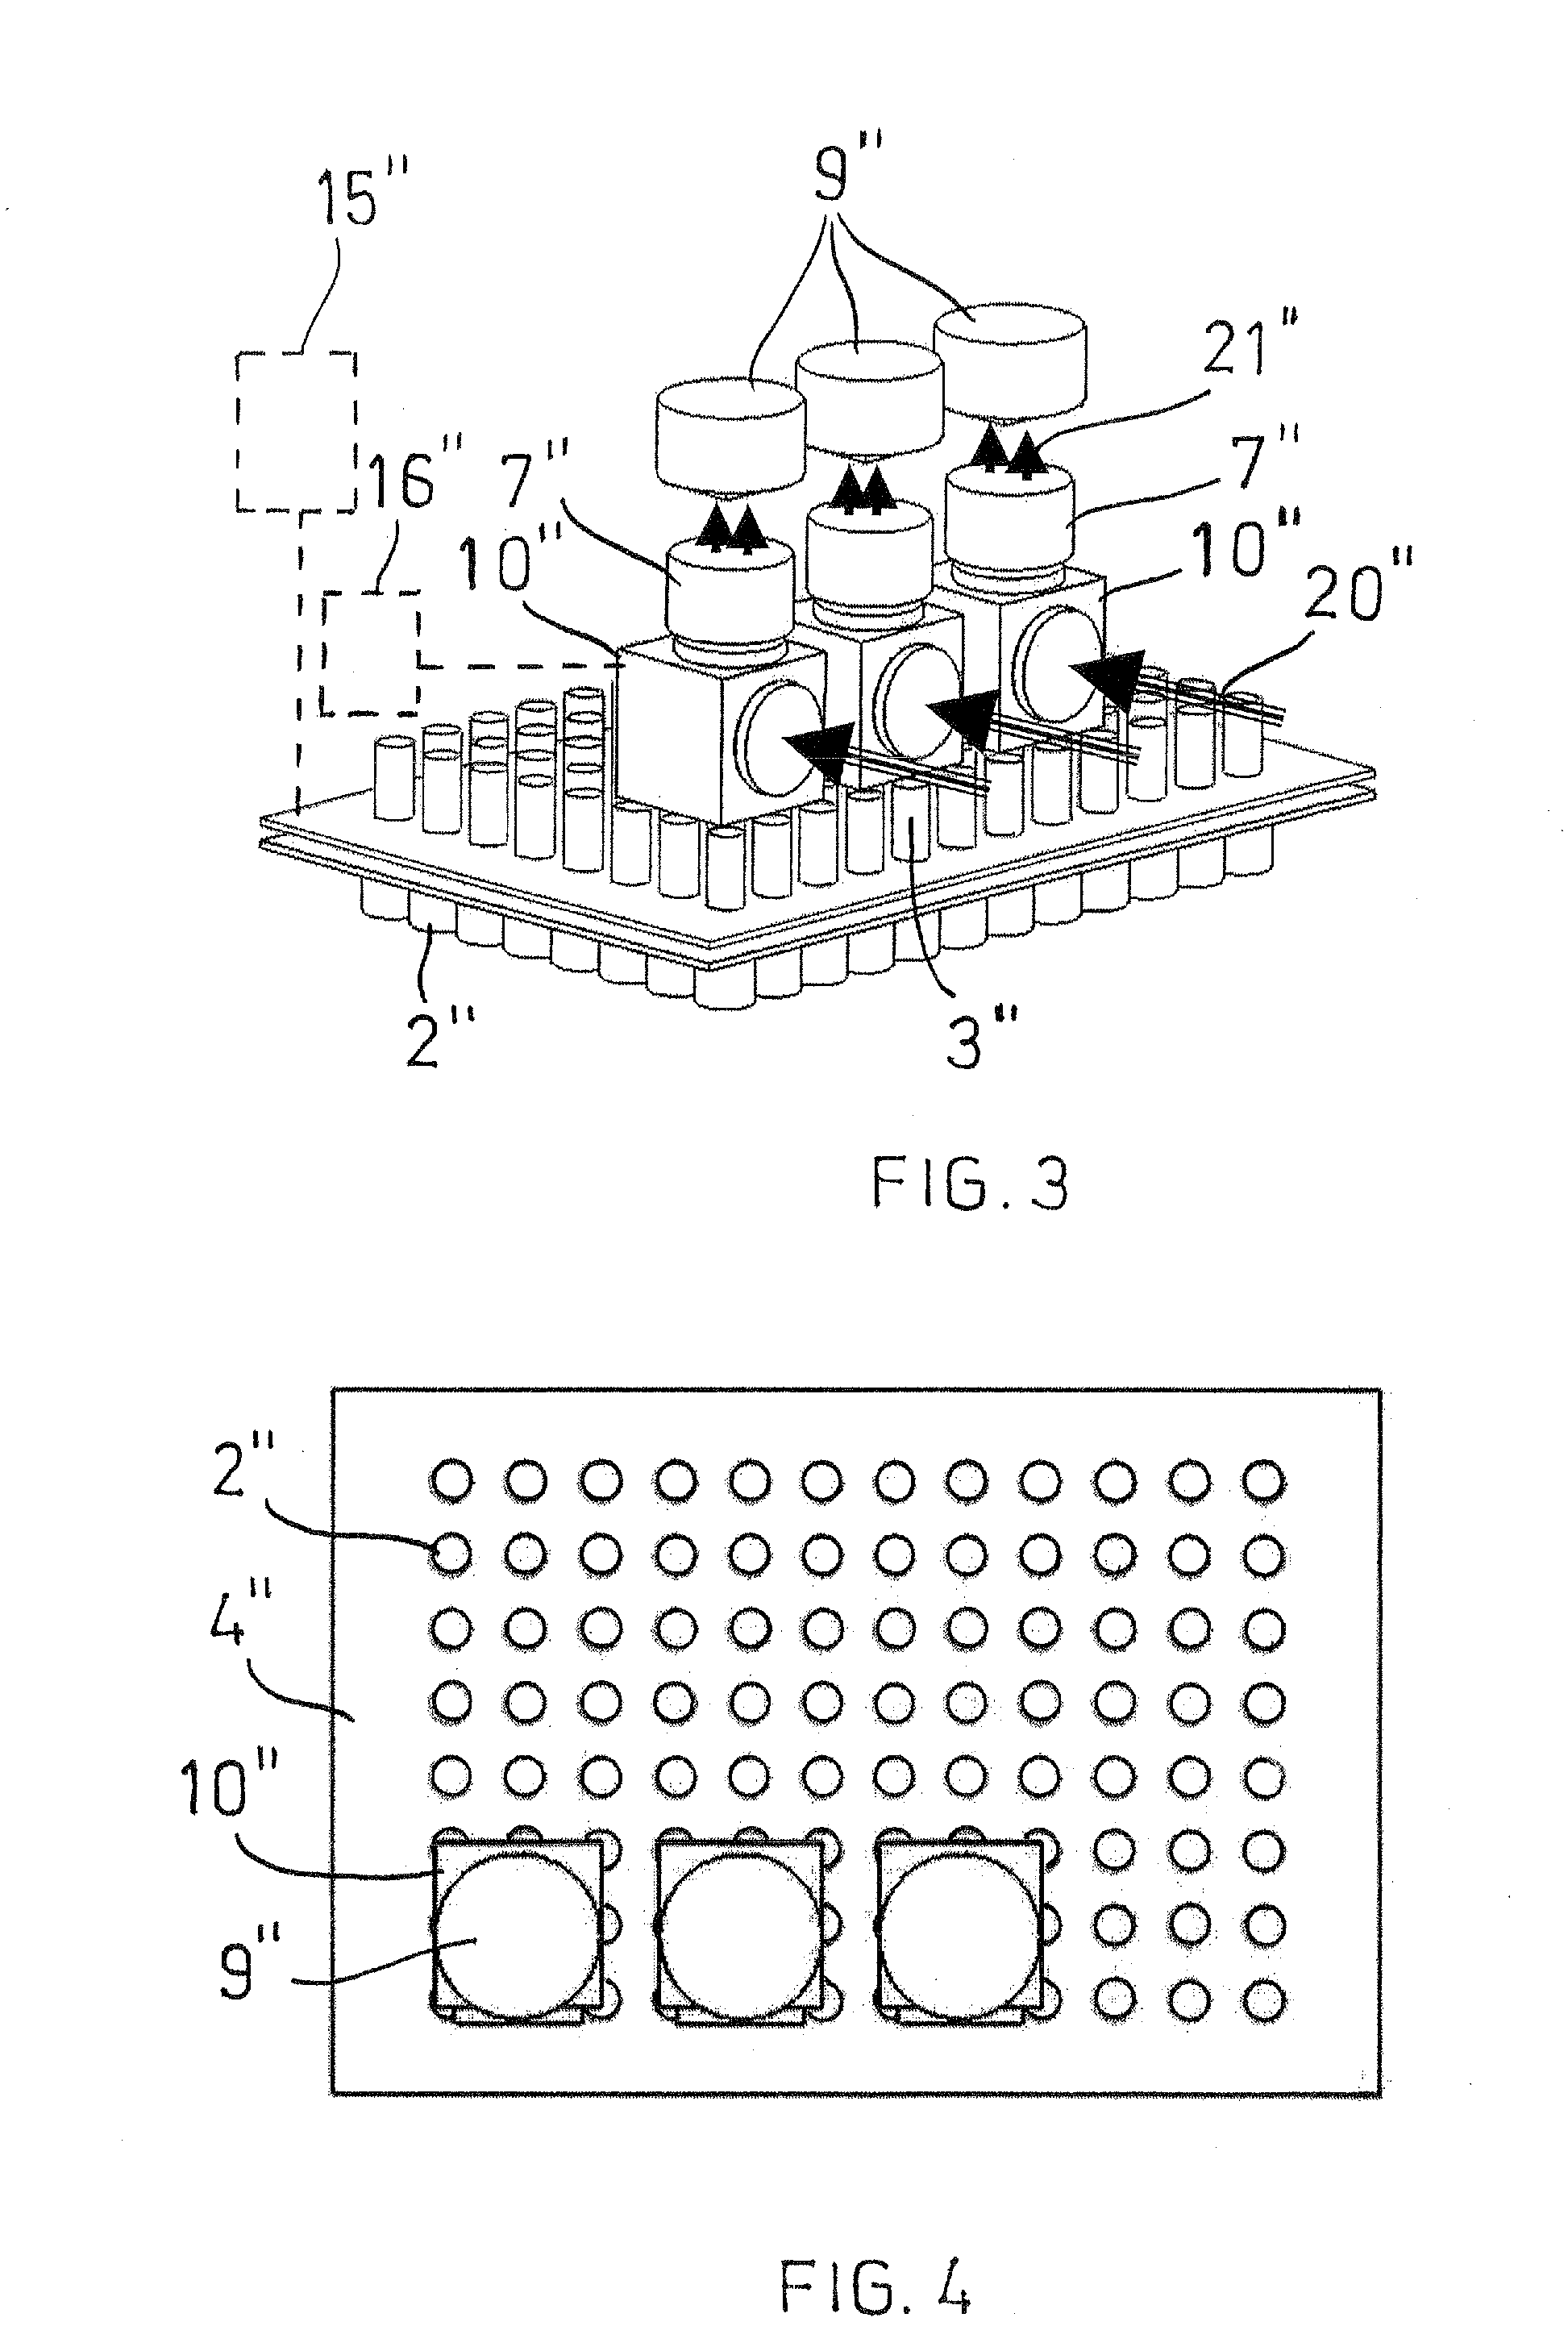 Arrangement in an Imaging System for Microtitre Wells